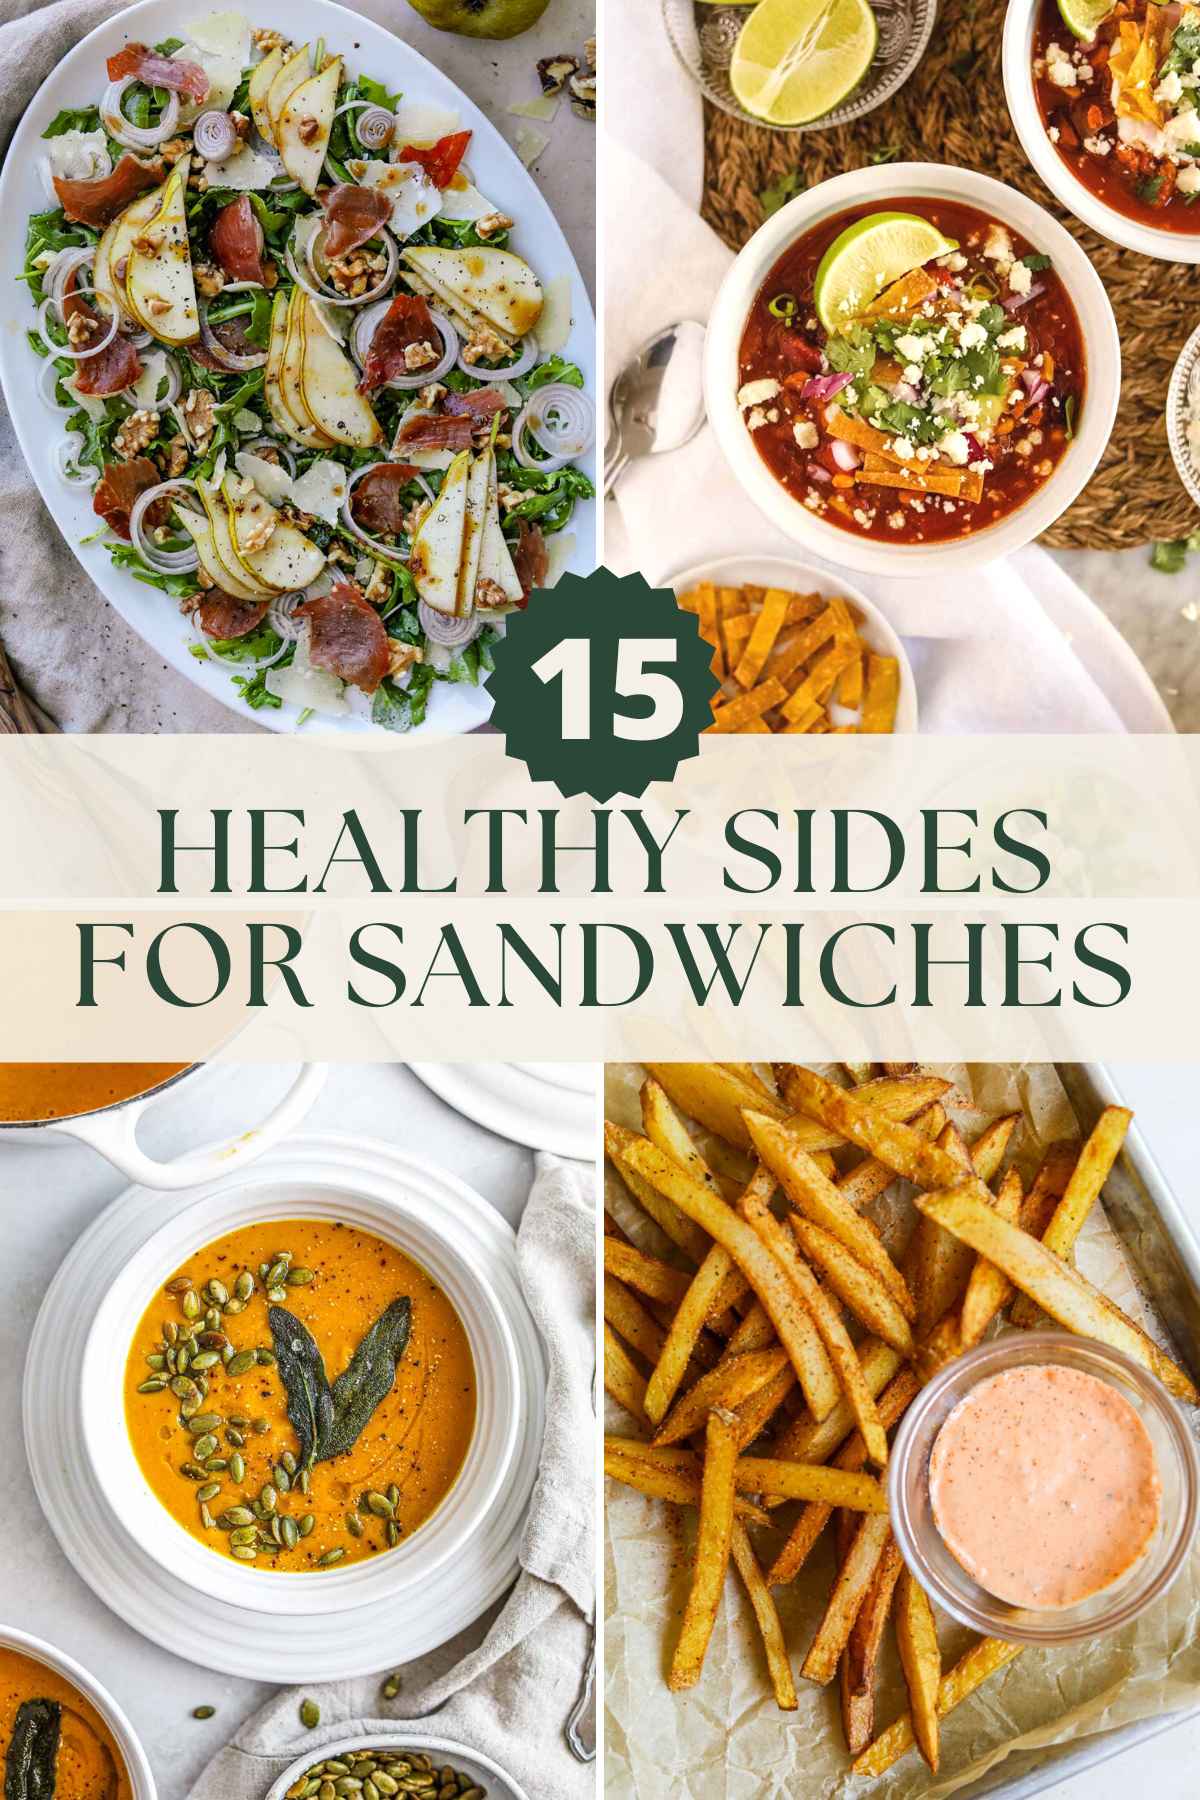 15 healthy side dishes for sandwiches, including healthy fries, salads, chili, and soup.